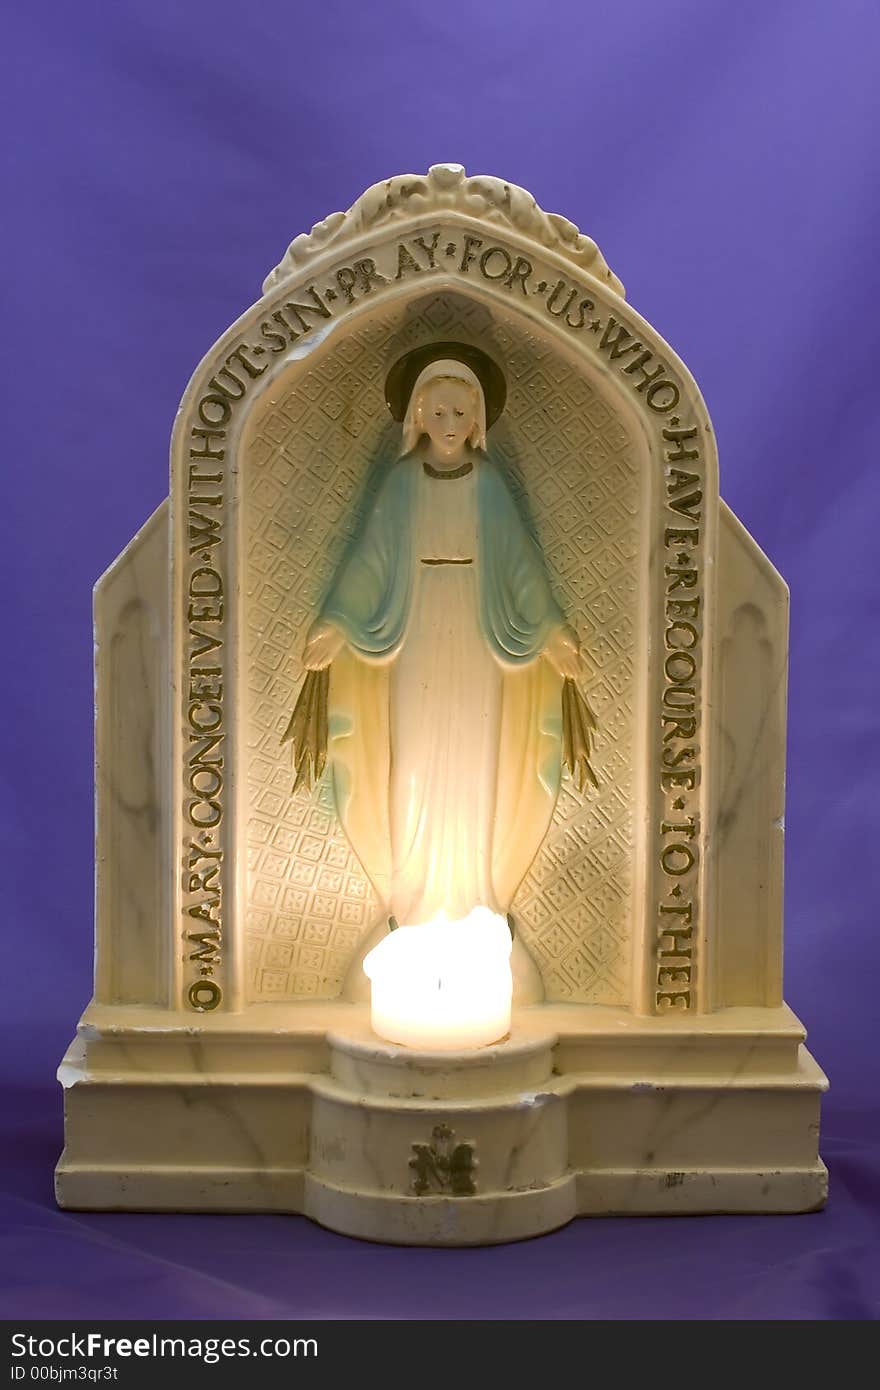 Antique statuette of the Virgin Mary with lit candle. Antique statuette of the Virgin Mary with lit candle.